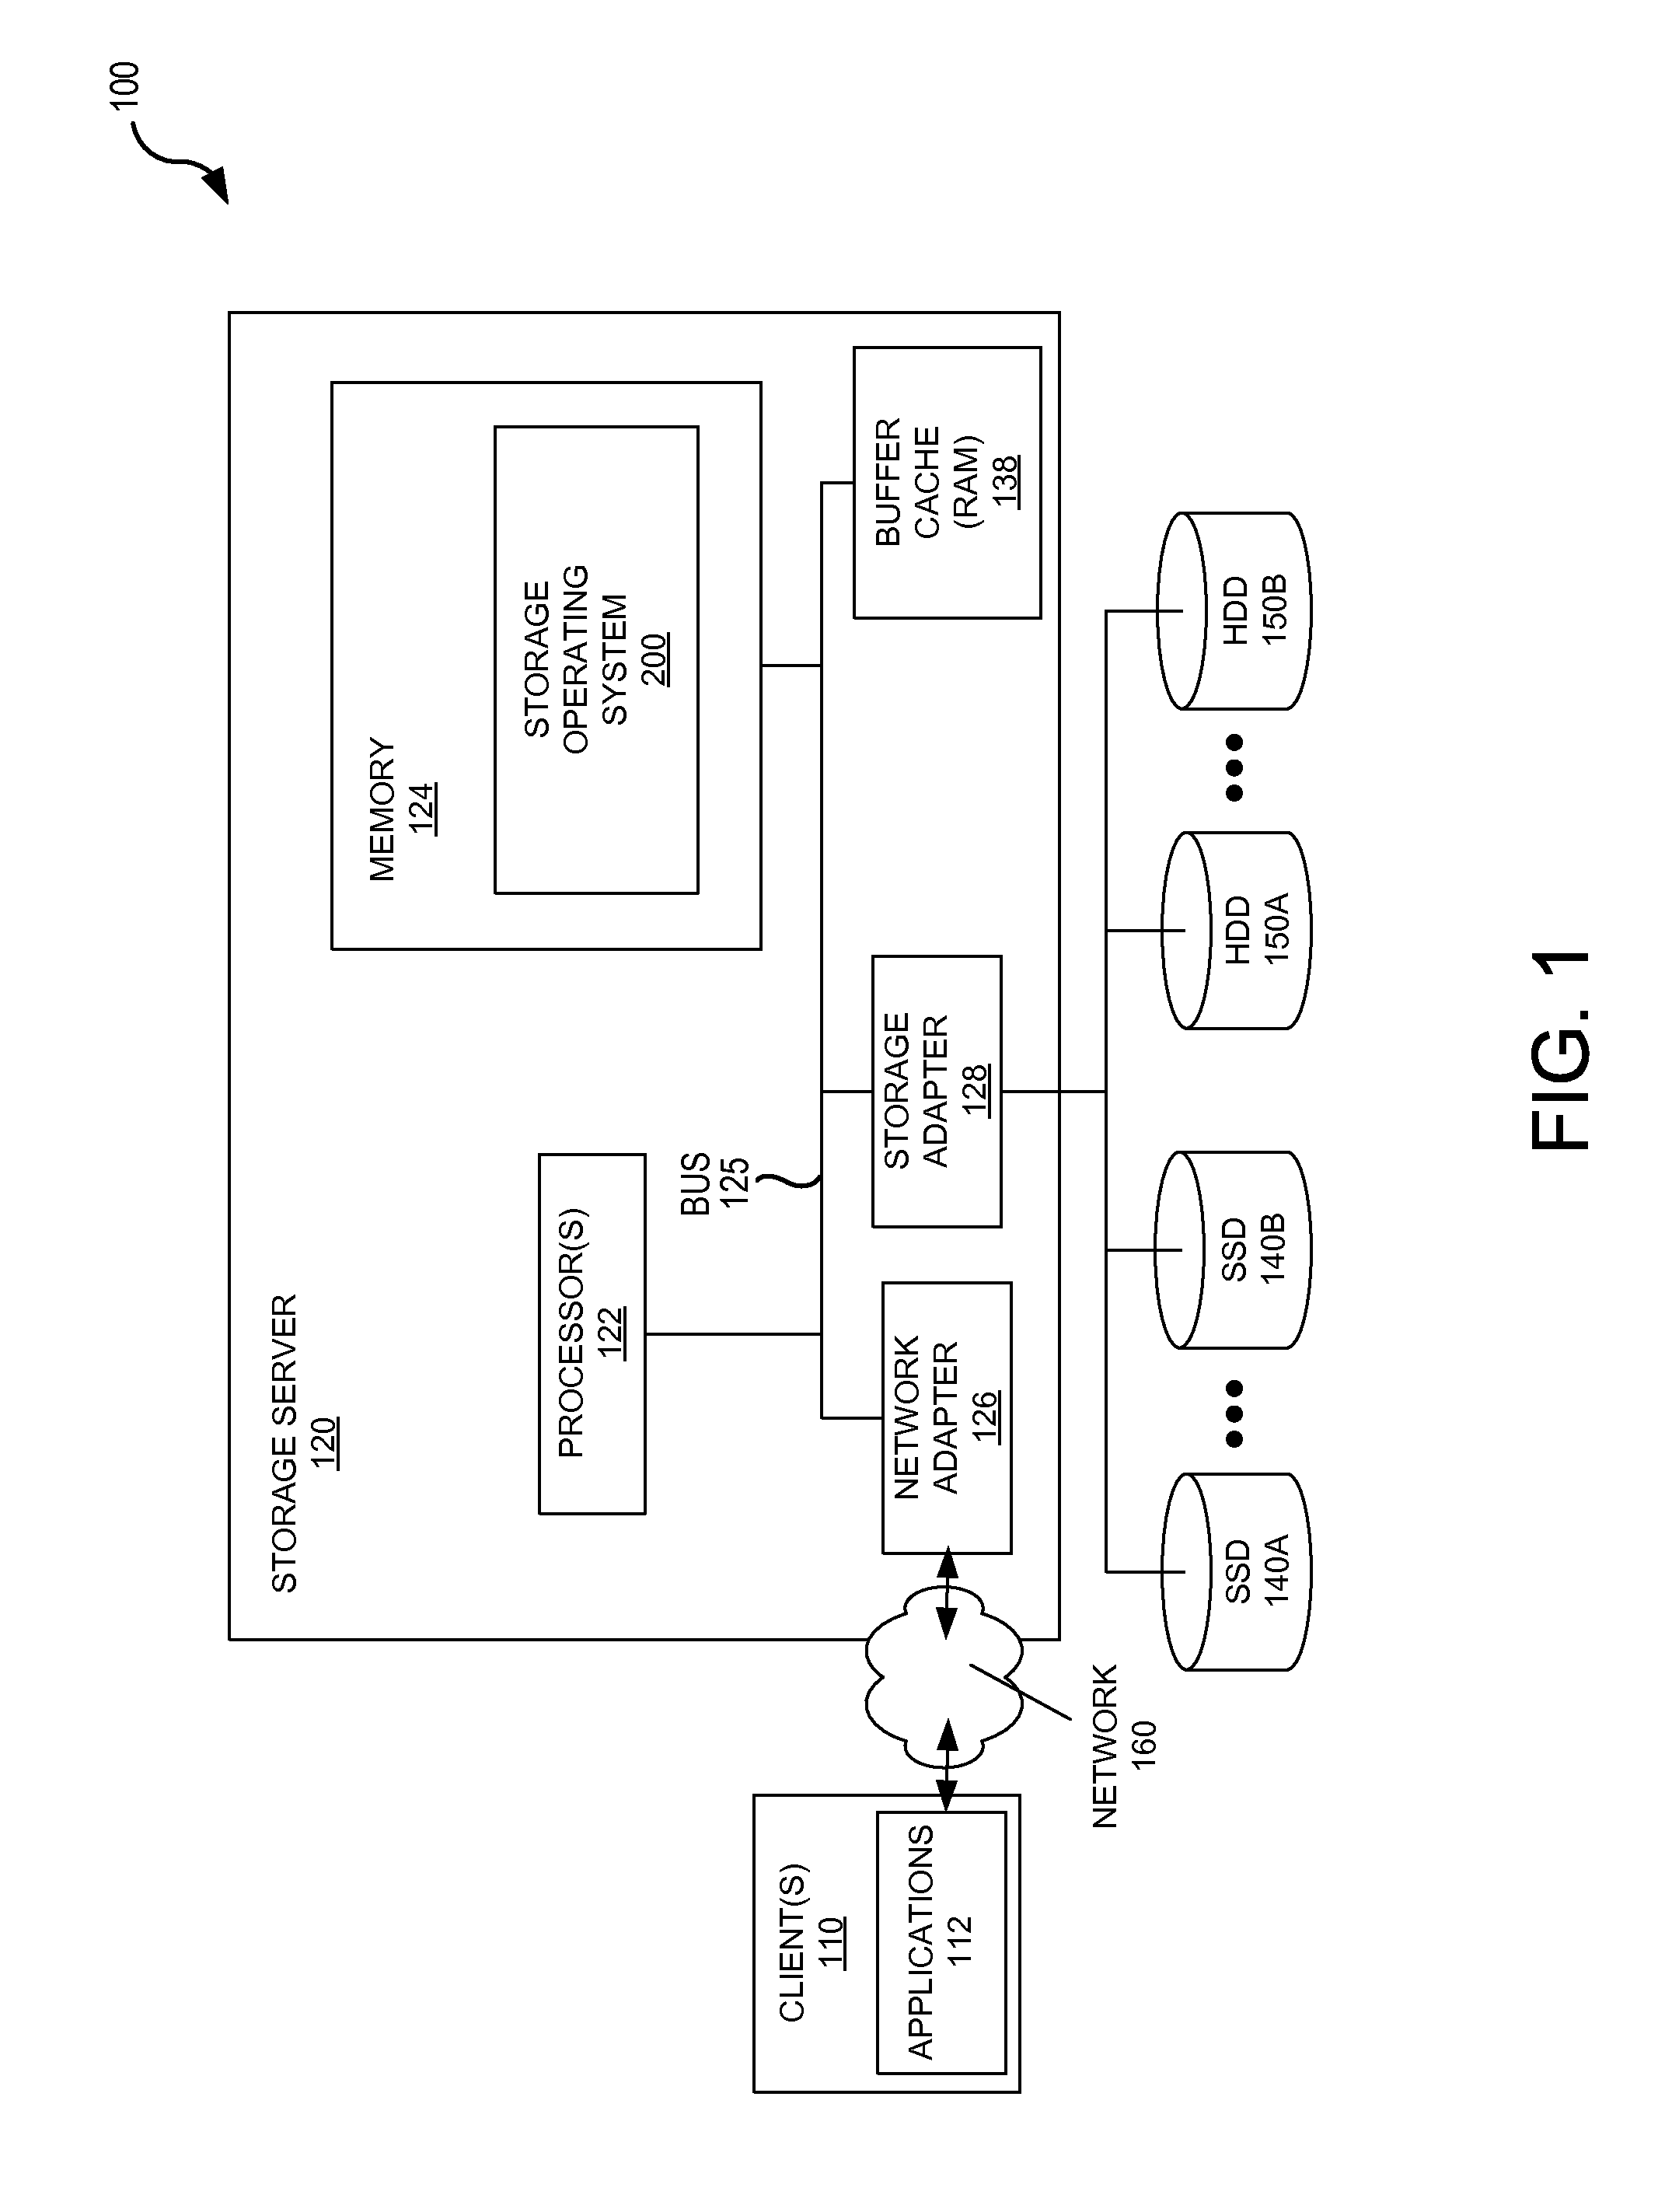 Systems and methods for hierarchical reference counting via sibling trees